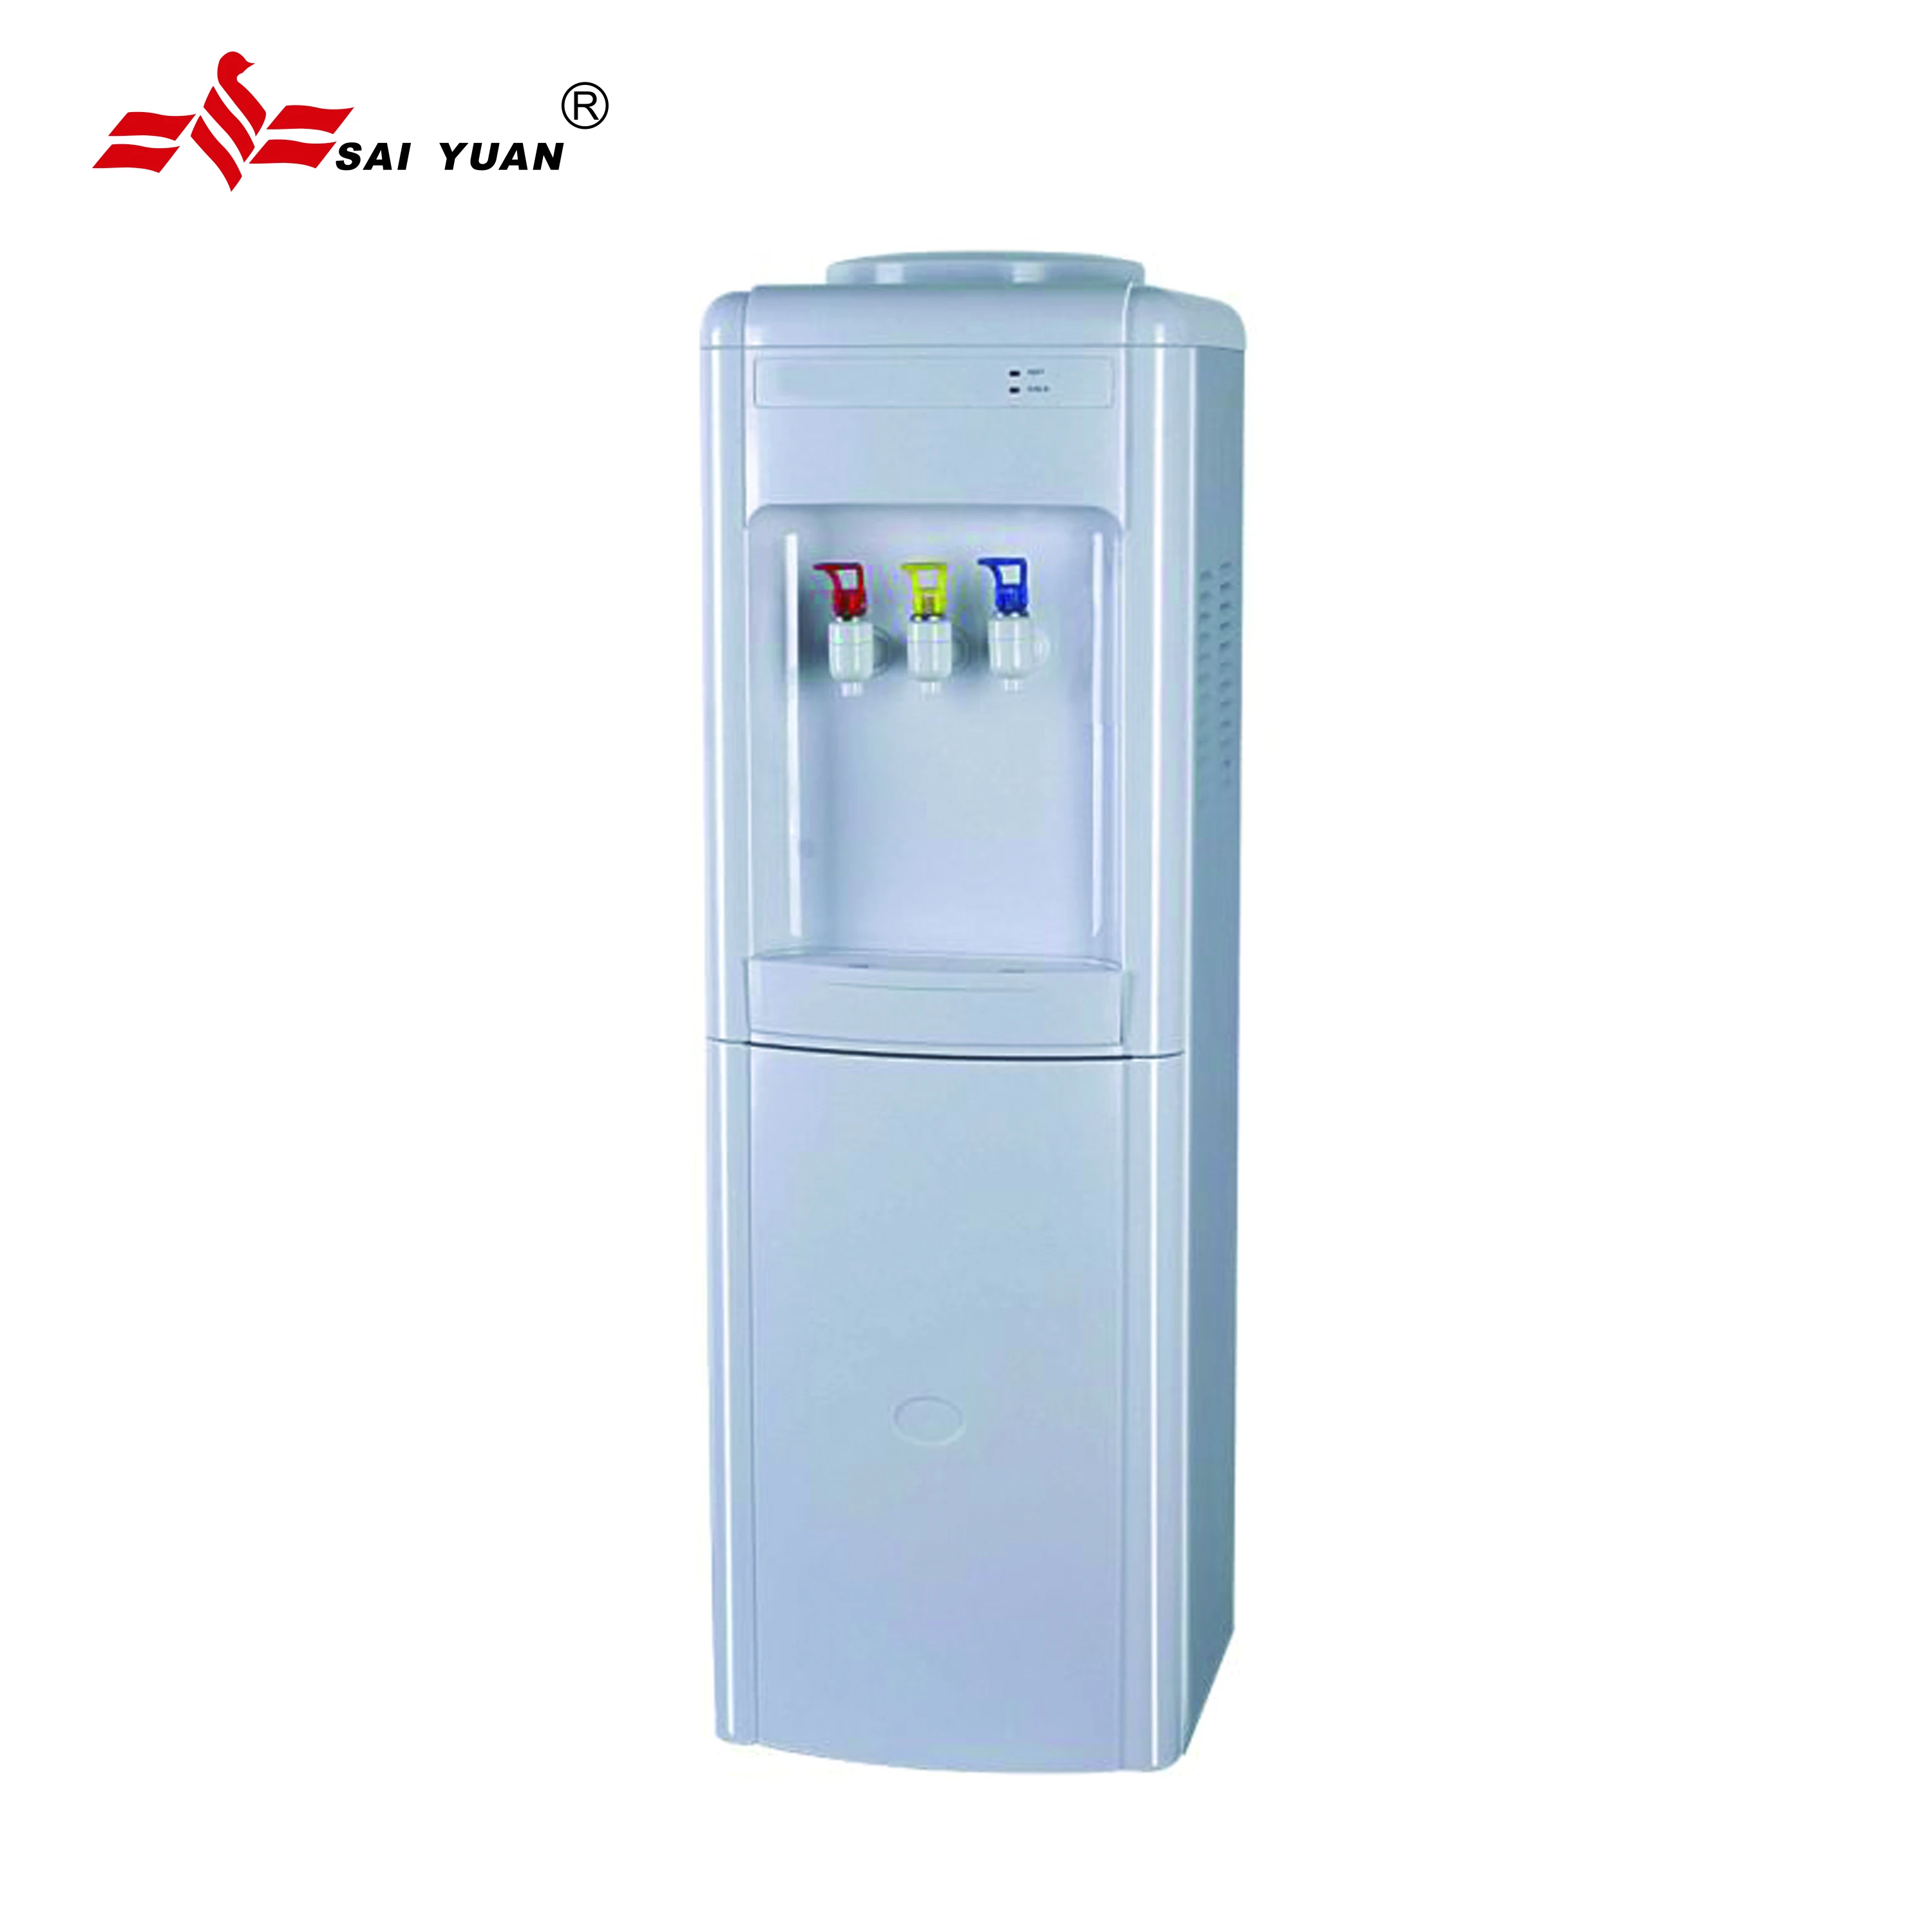 
Hot And Cold water dispenser 